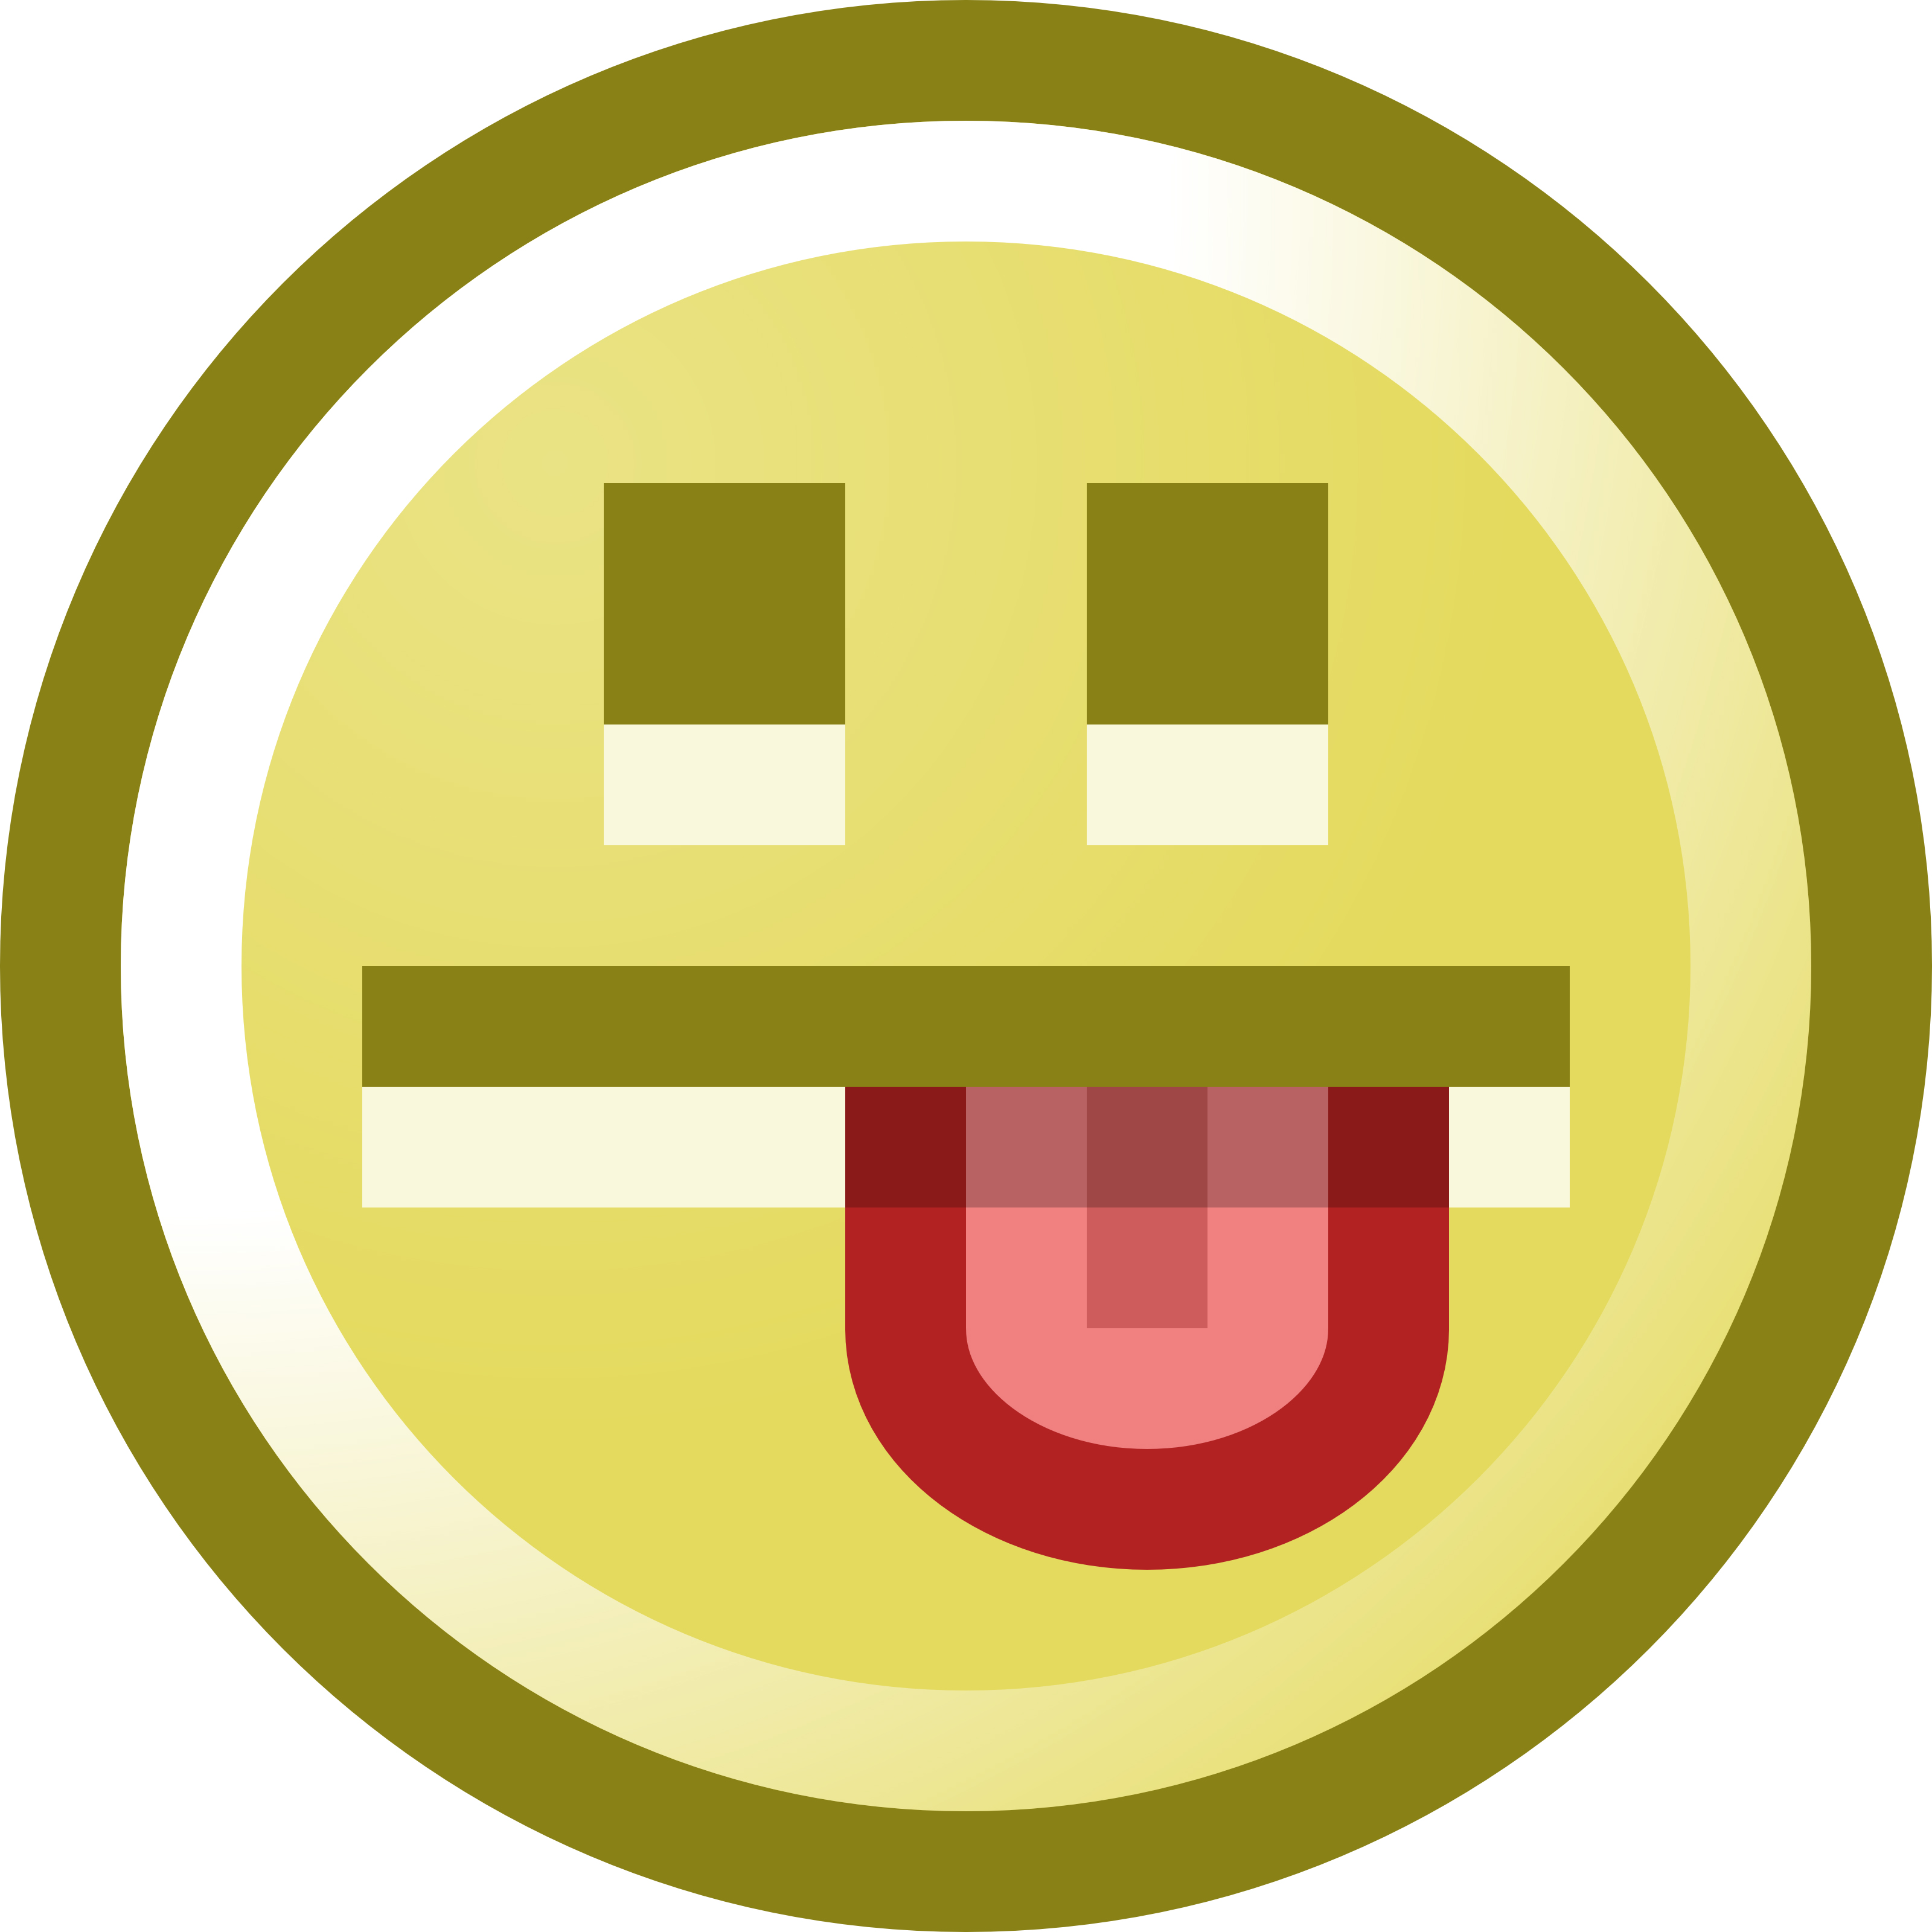 Winking Smiley Face Clip Art | Clipart Panda - Free Clipart Images